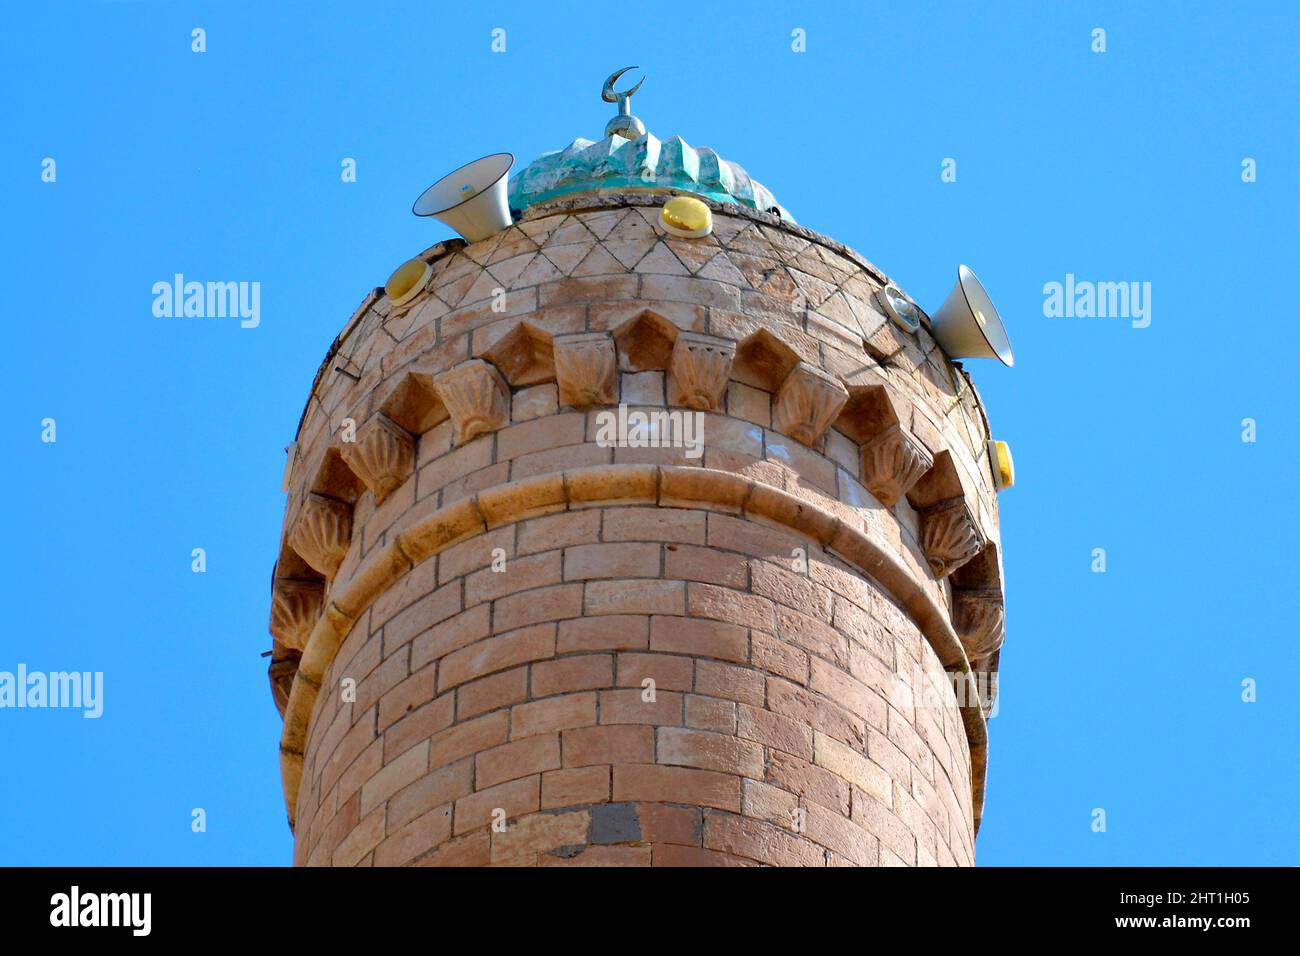 The top, the roof of the minaret with the symbol of the crescent moon and the speakers through which the muezzin singer calls for prayer, Muslim archi Stock Photo